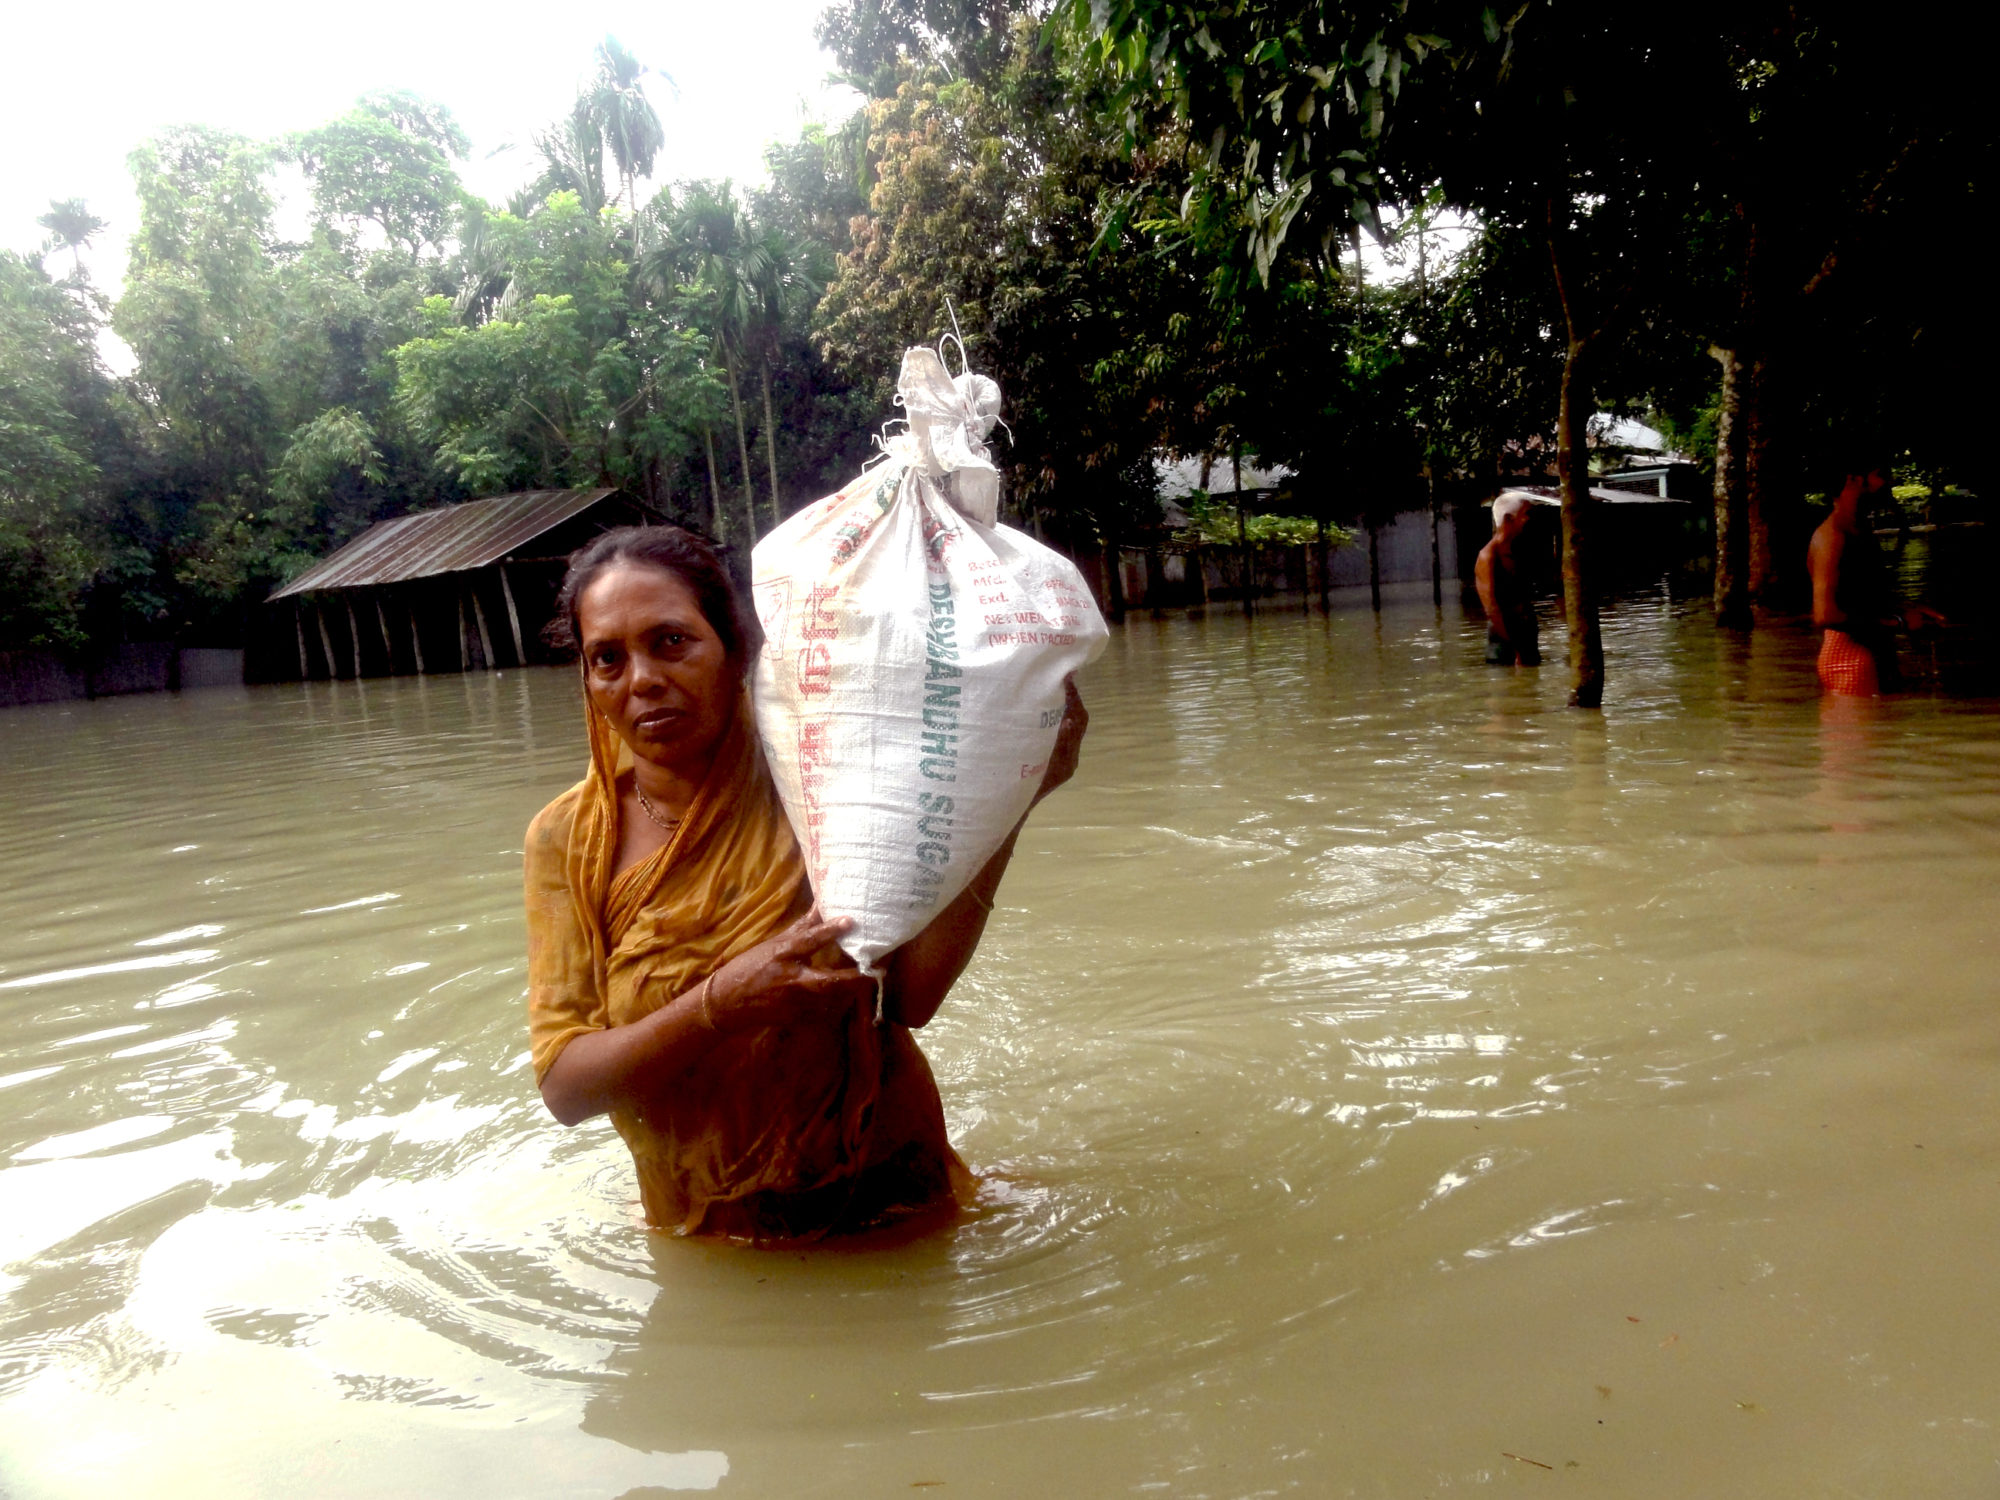 Severe flooding across South Asia in 2017 devastated the livelihoods of many women and their communities.